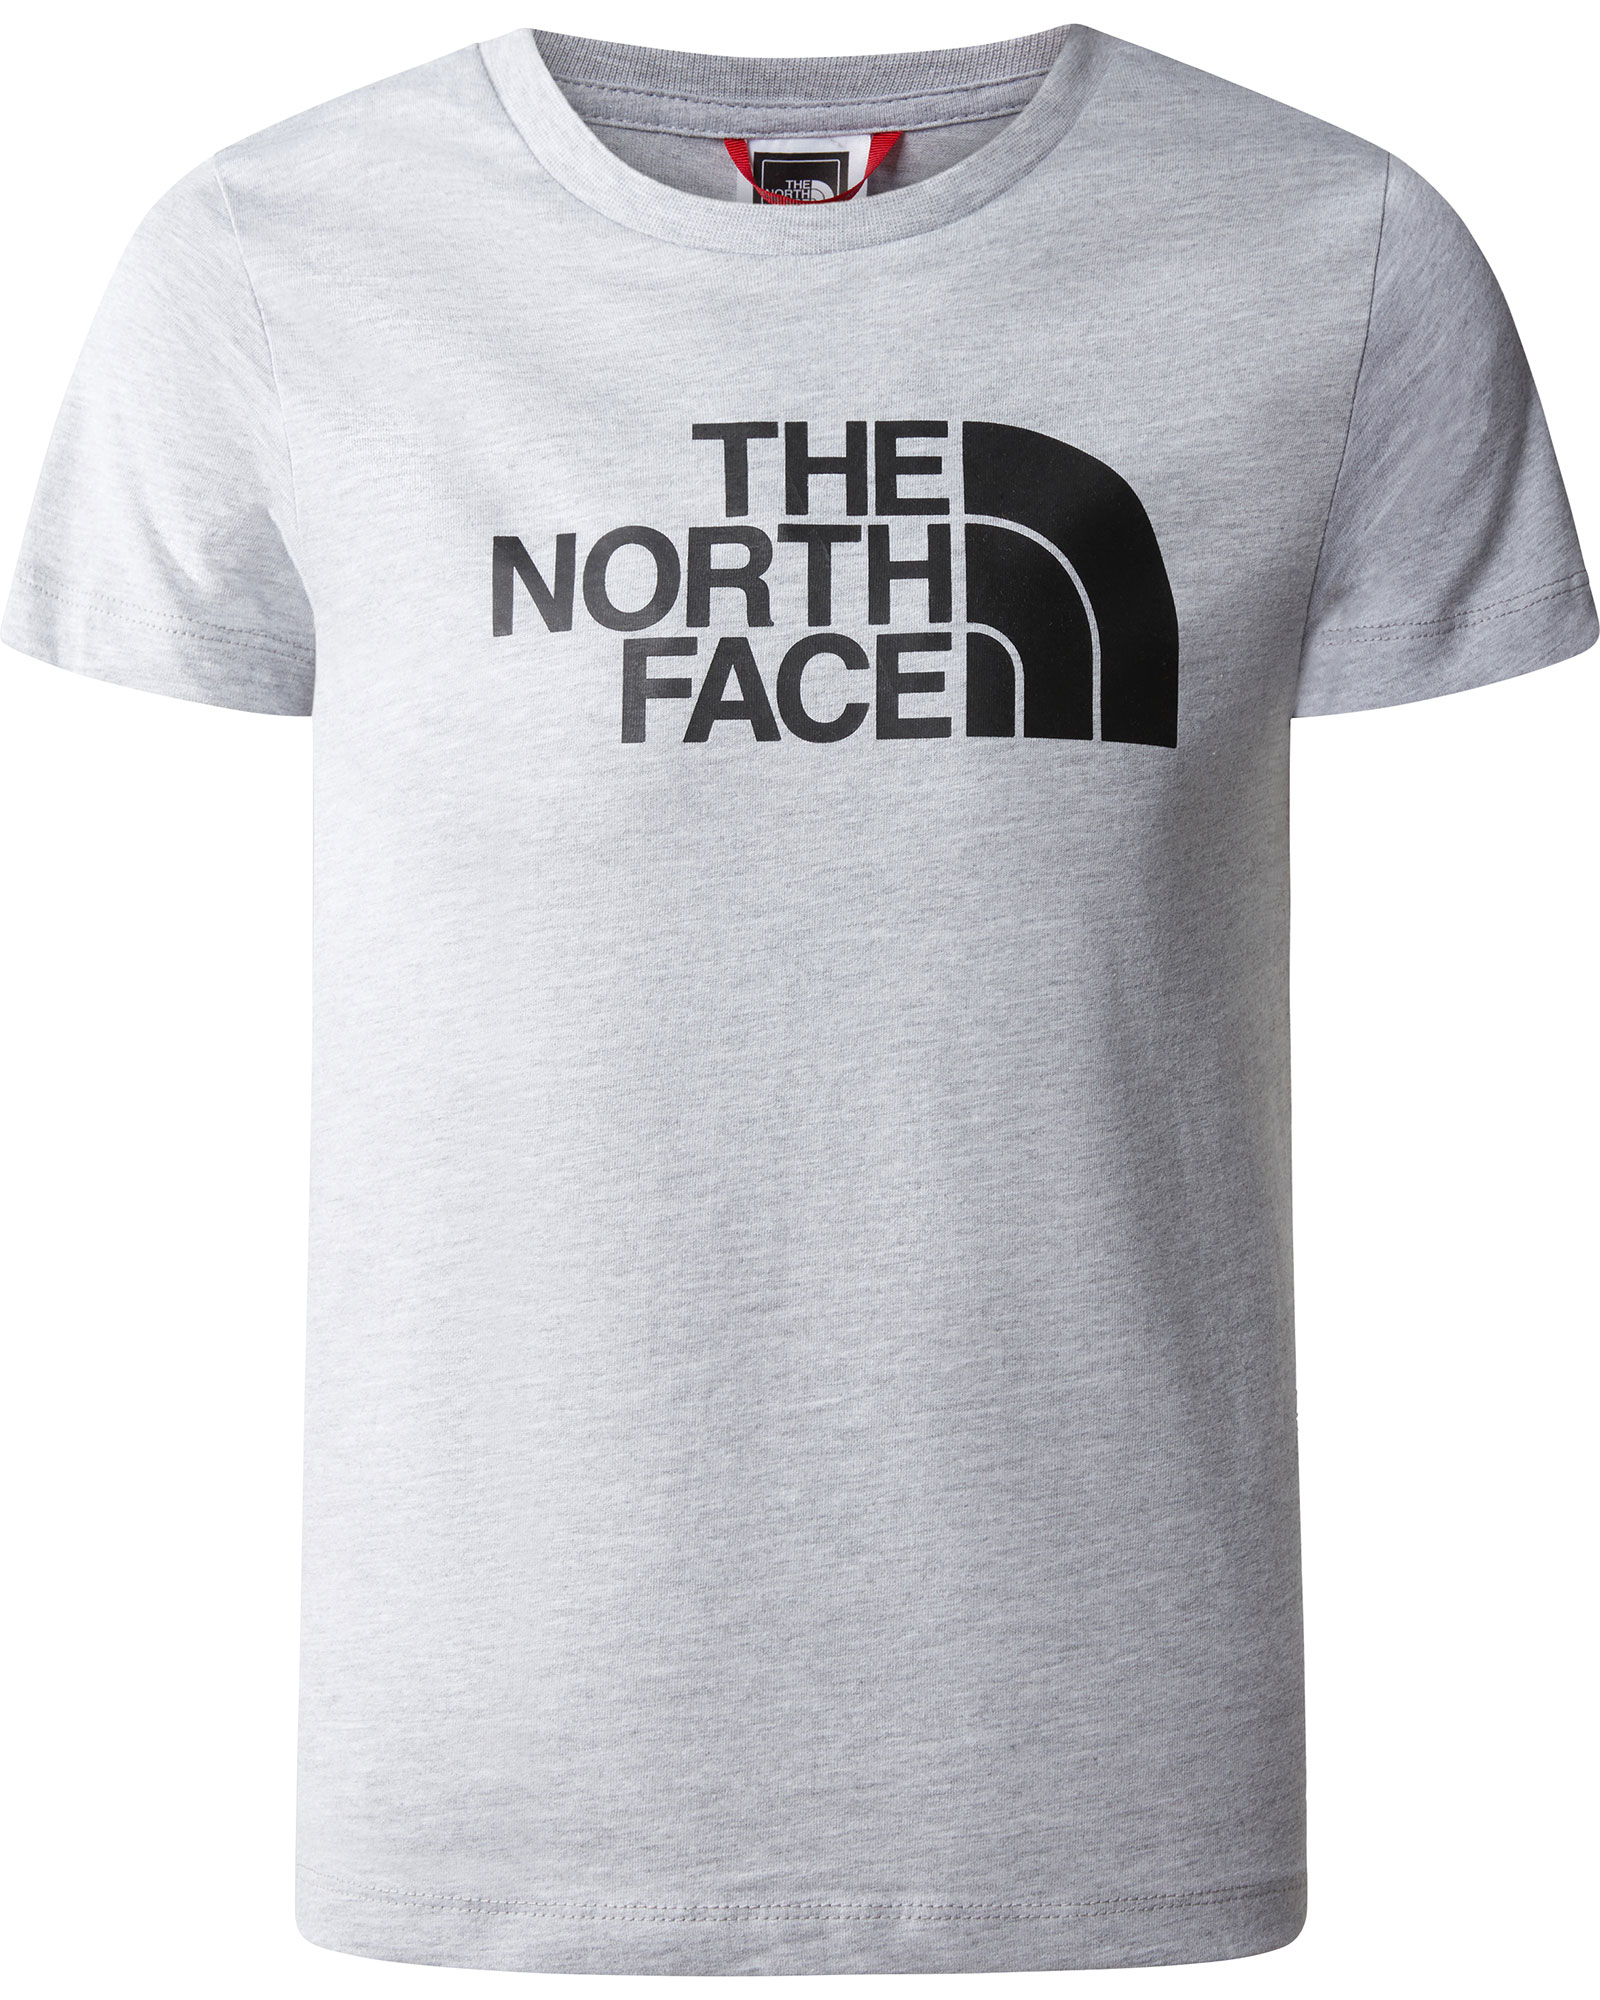 The North Face Boy’s Easy T Shirt - Light Grey Heather L